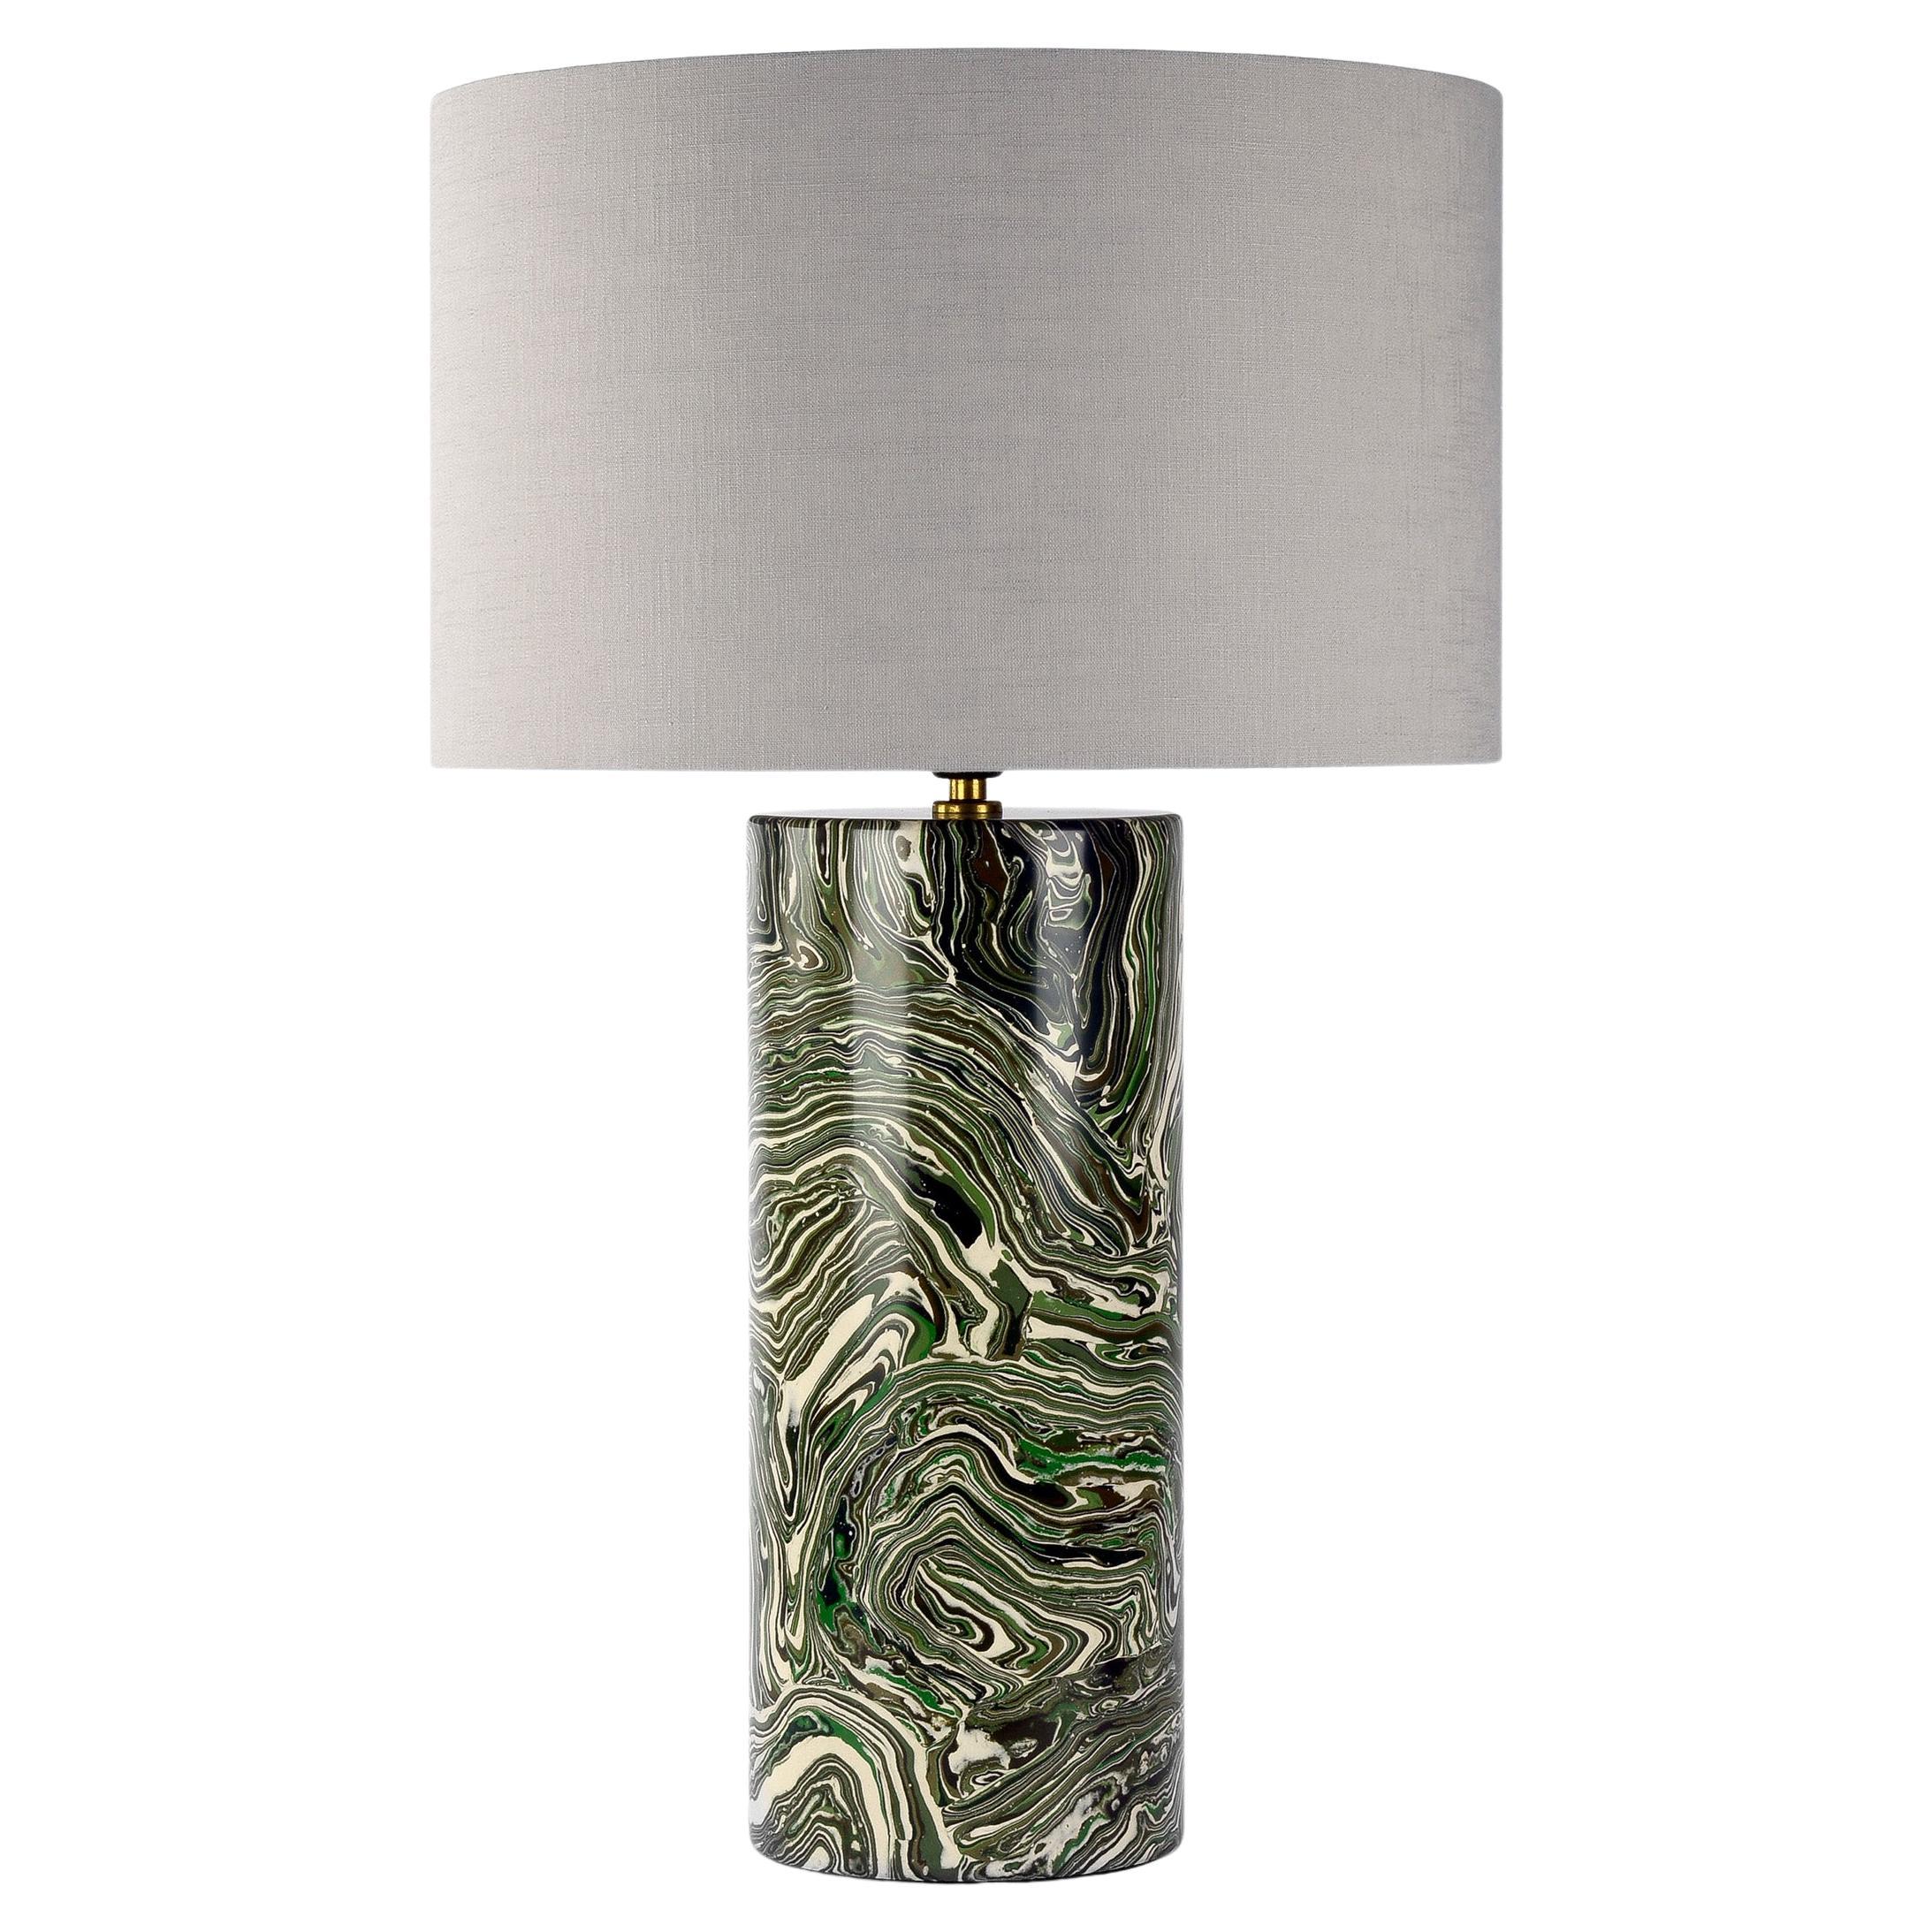 Scagliola Table Lamp For Sale